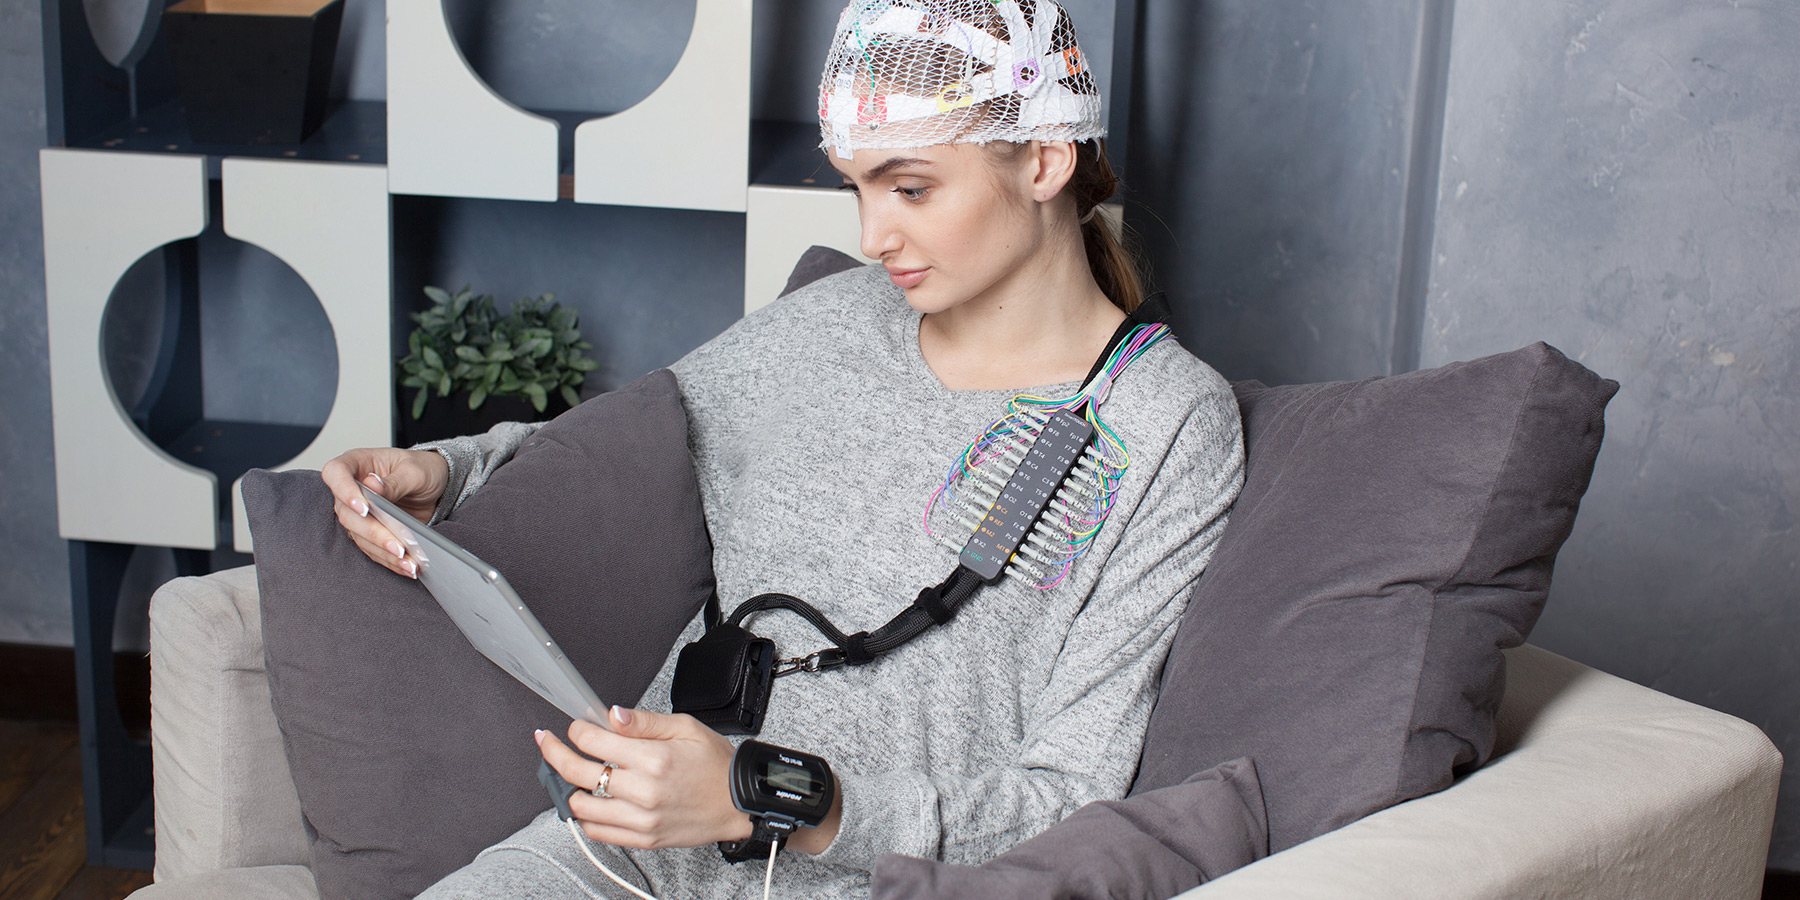 72-Hour Eeg at Home